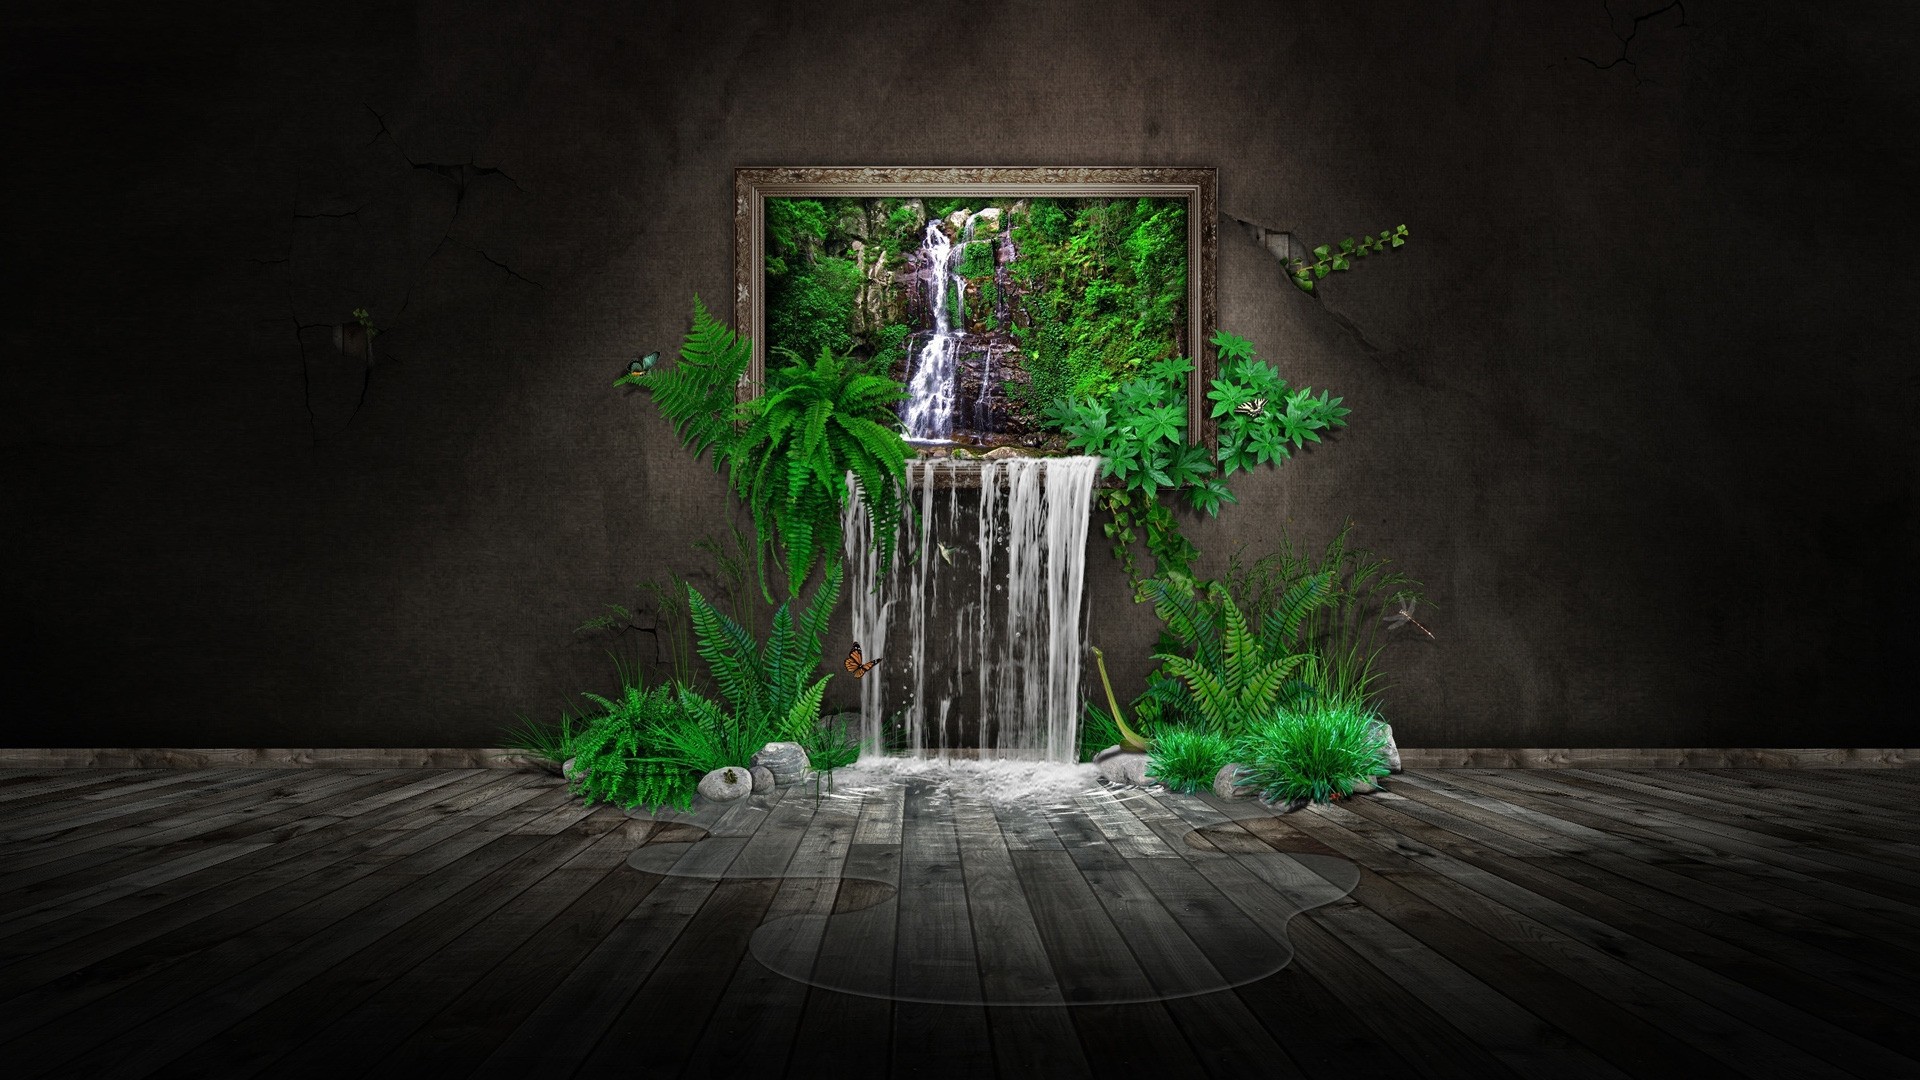 General 1920x1080 digital art CGI minimalism water nature ferns leaves trees waterfall picture frames rocks stones butterfly wall wooden surface puddle picture